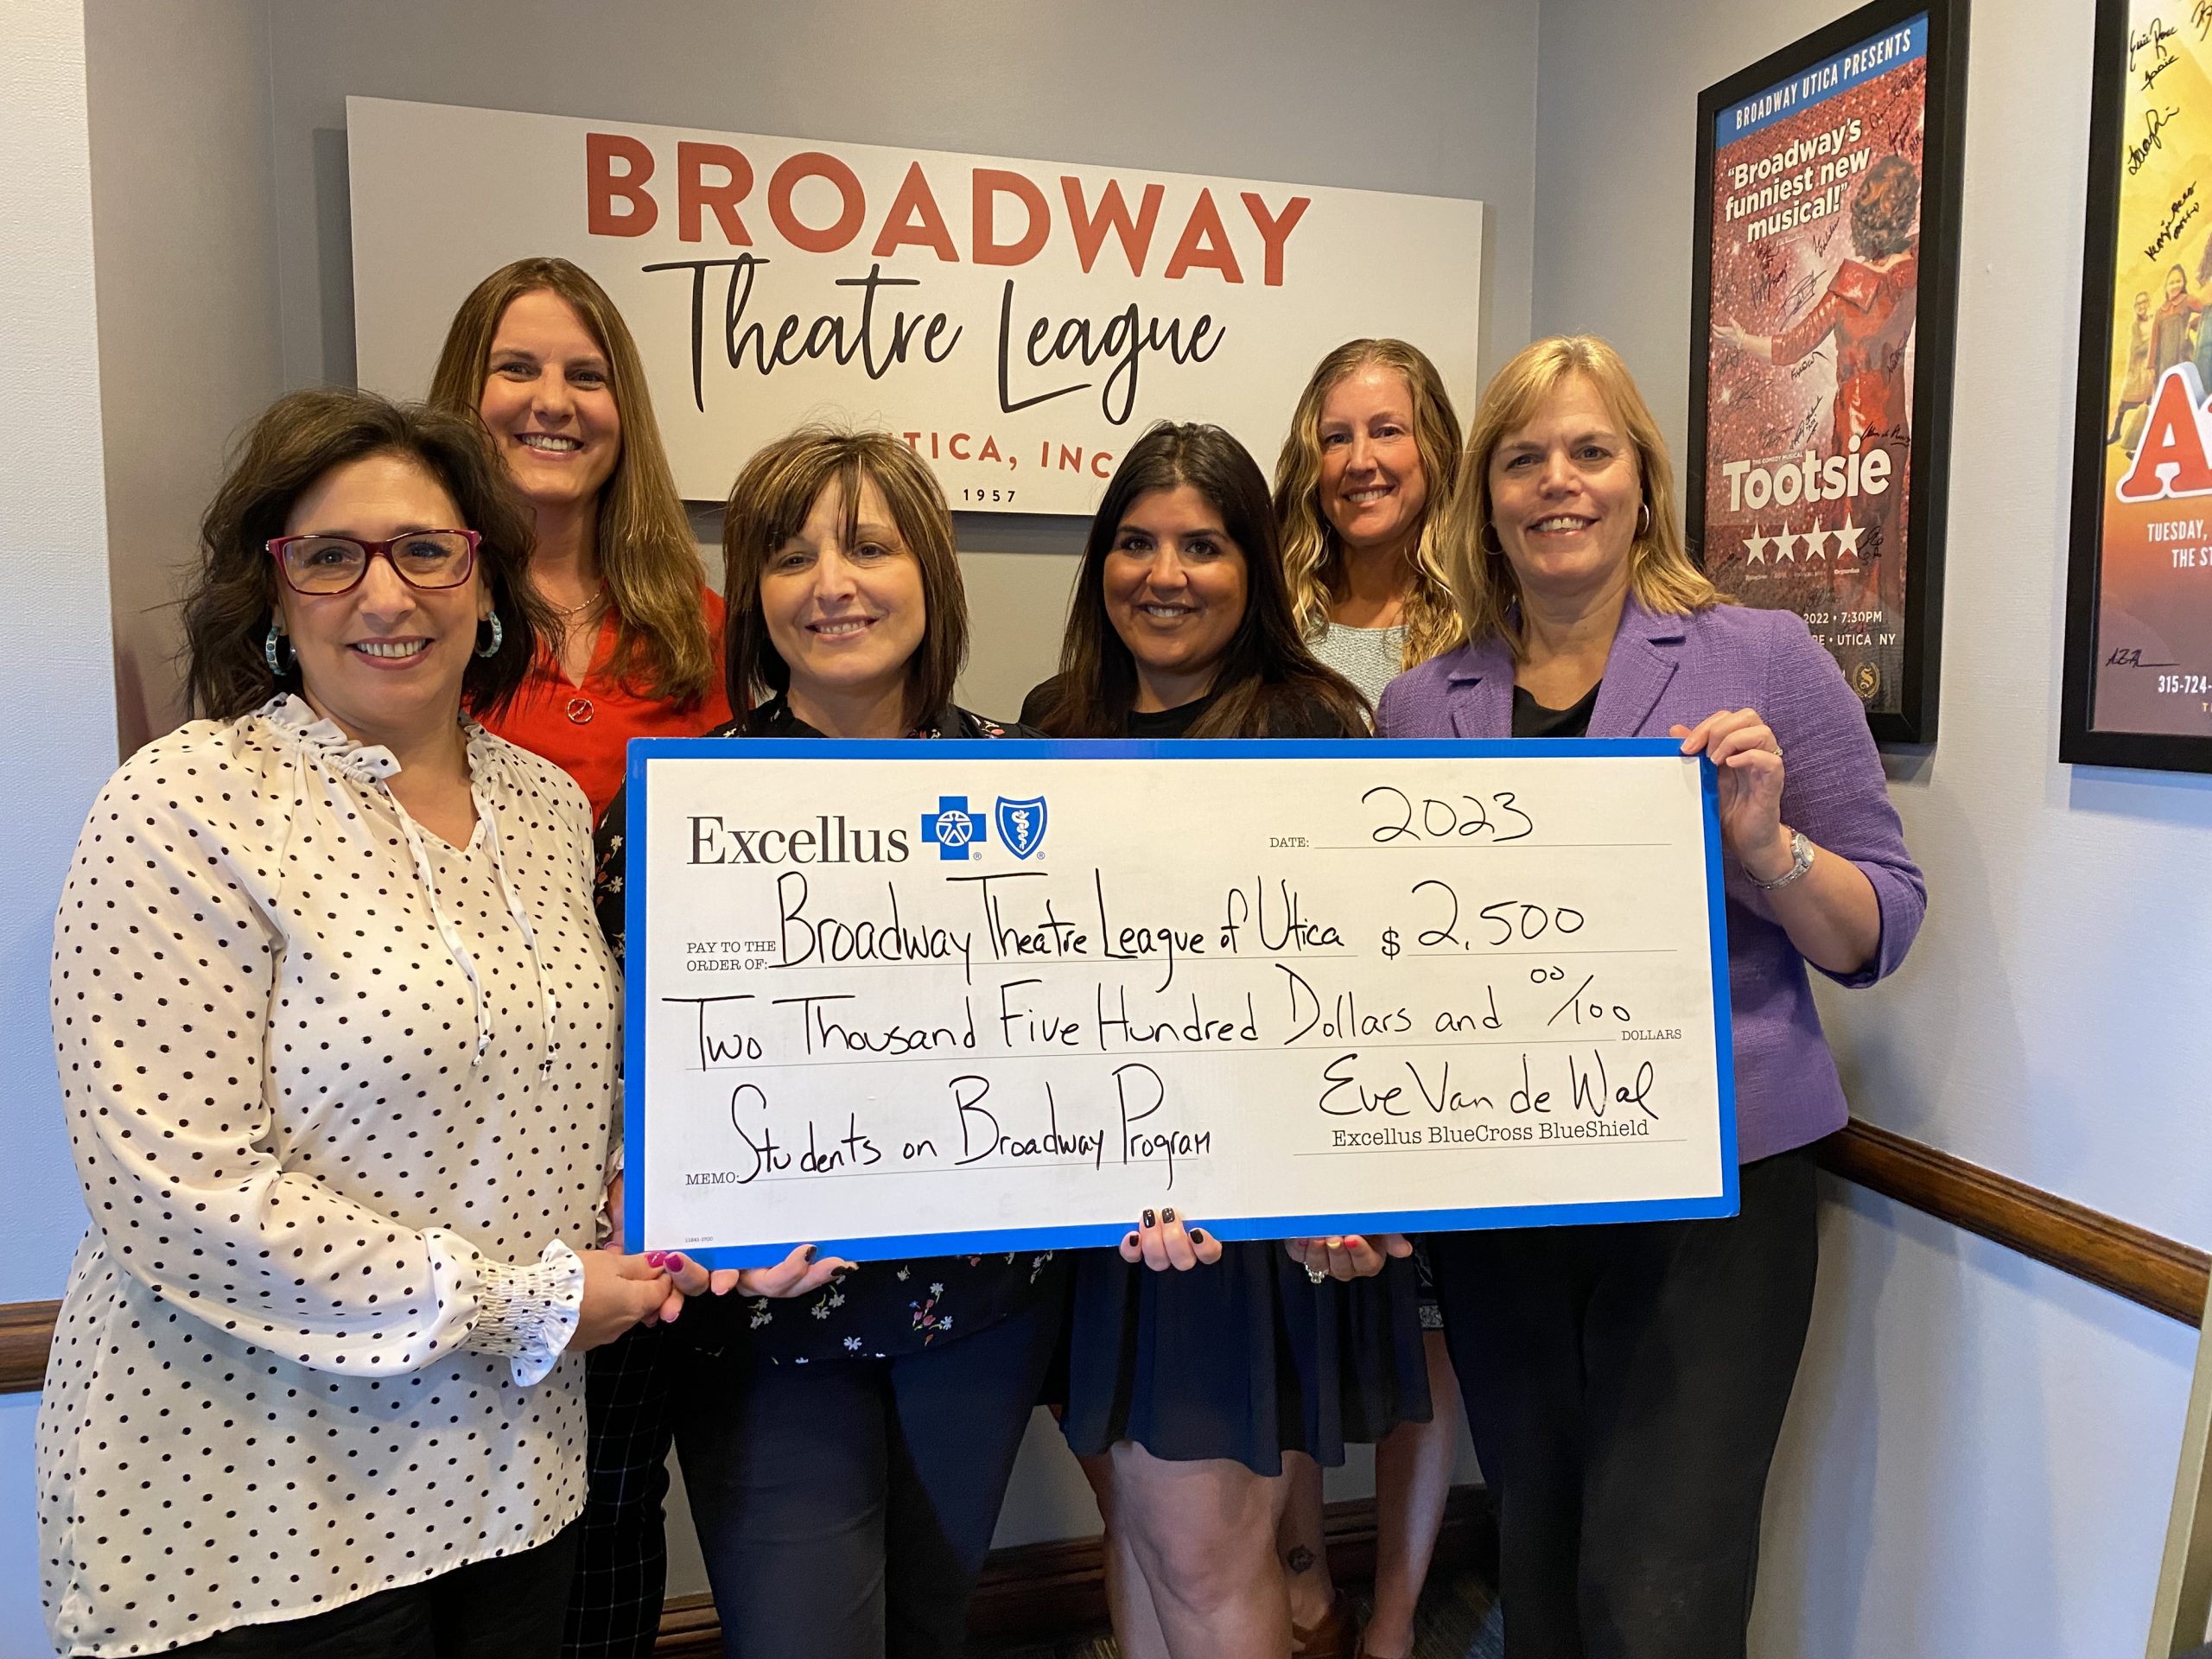 Broadway Theatre League of Utica receives Health and Wellness Award